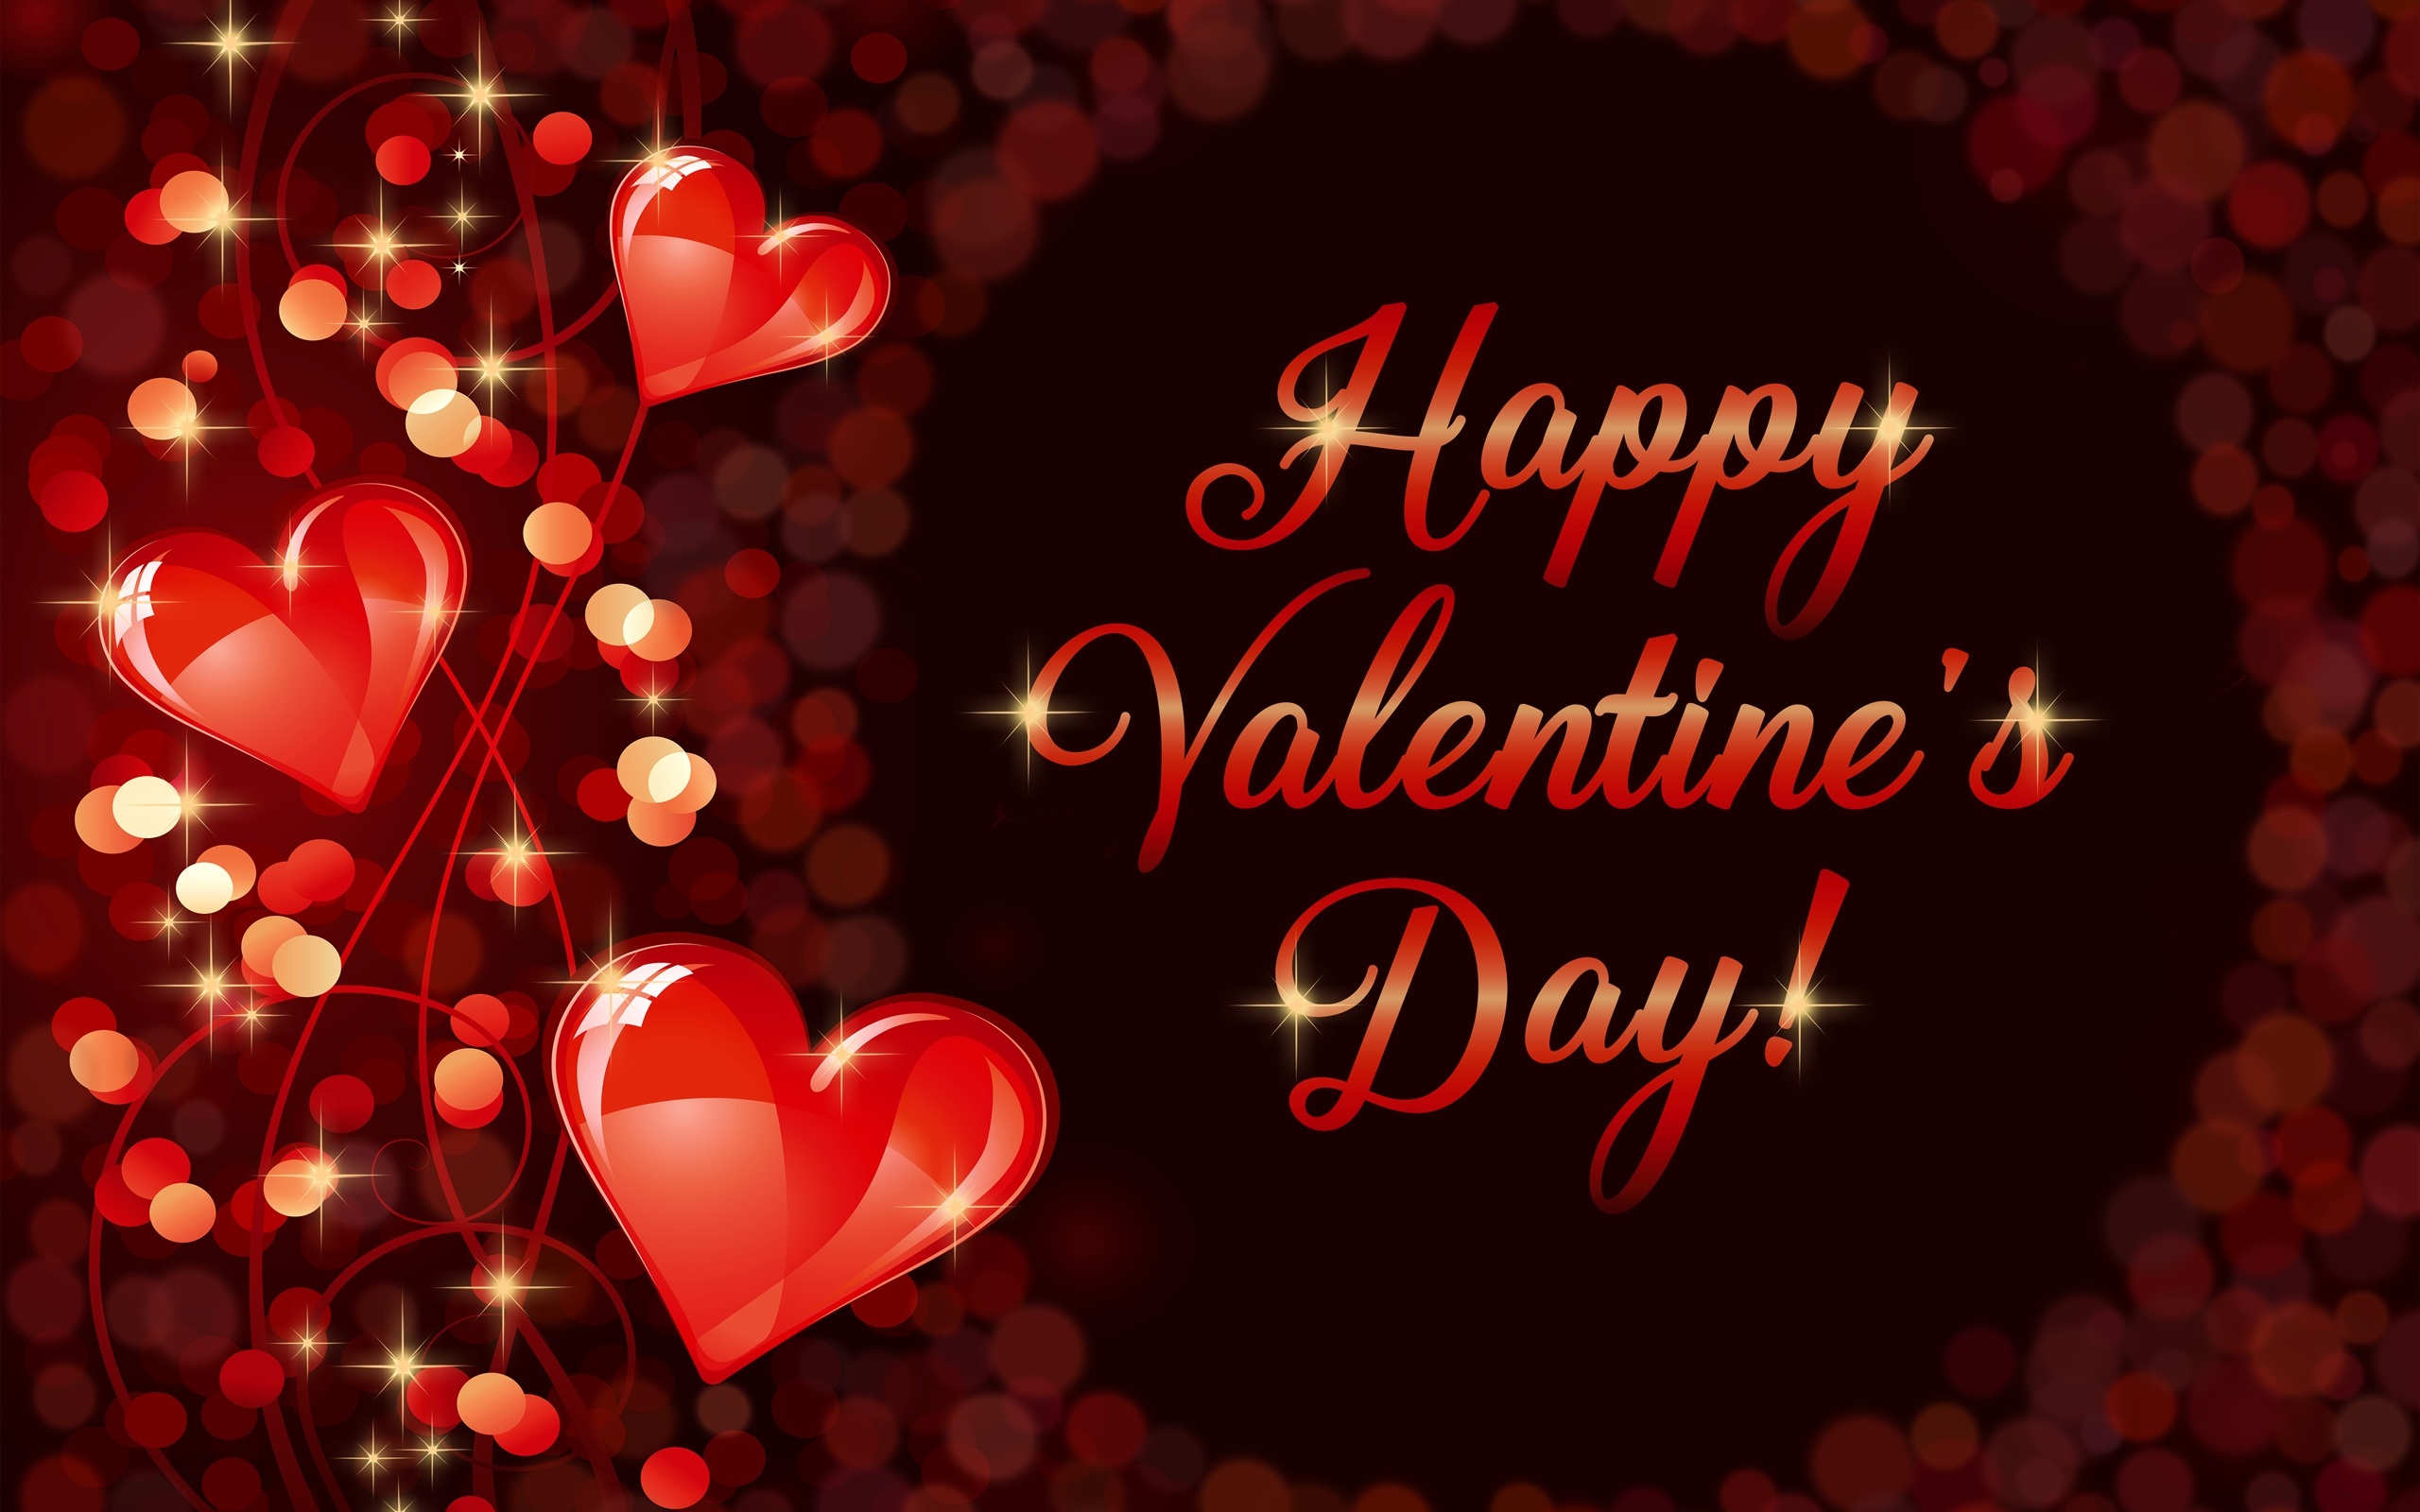 romantic wallpaper hd,heart,red,valentine's day,text,love